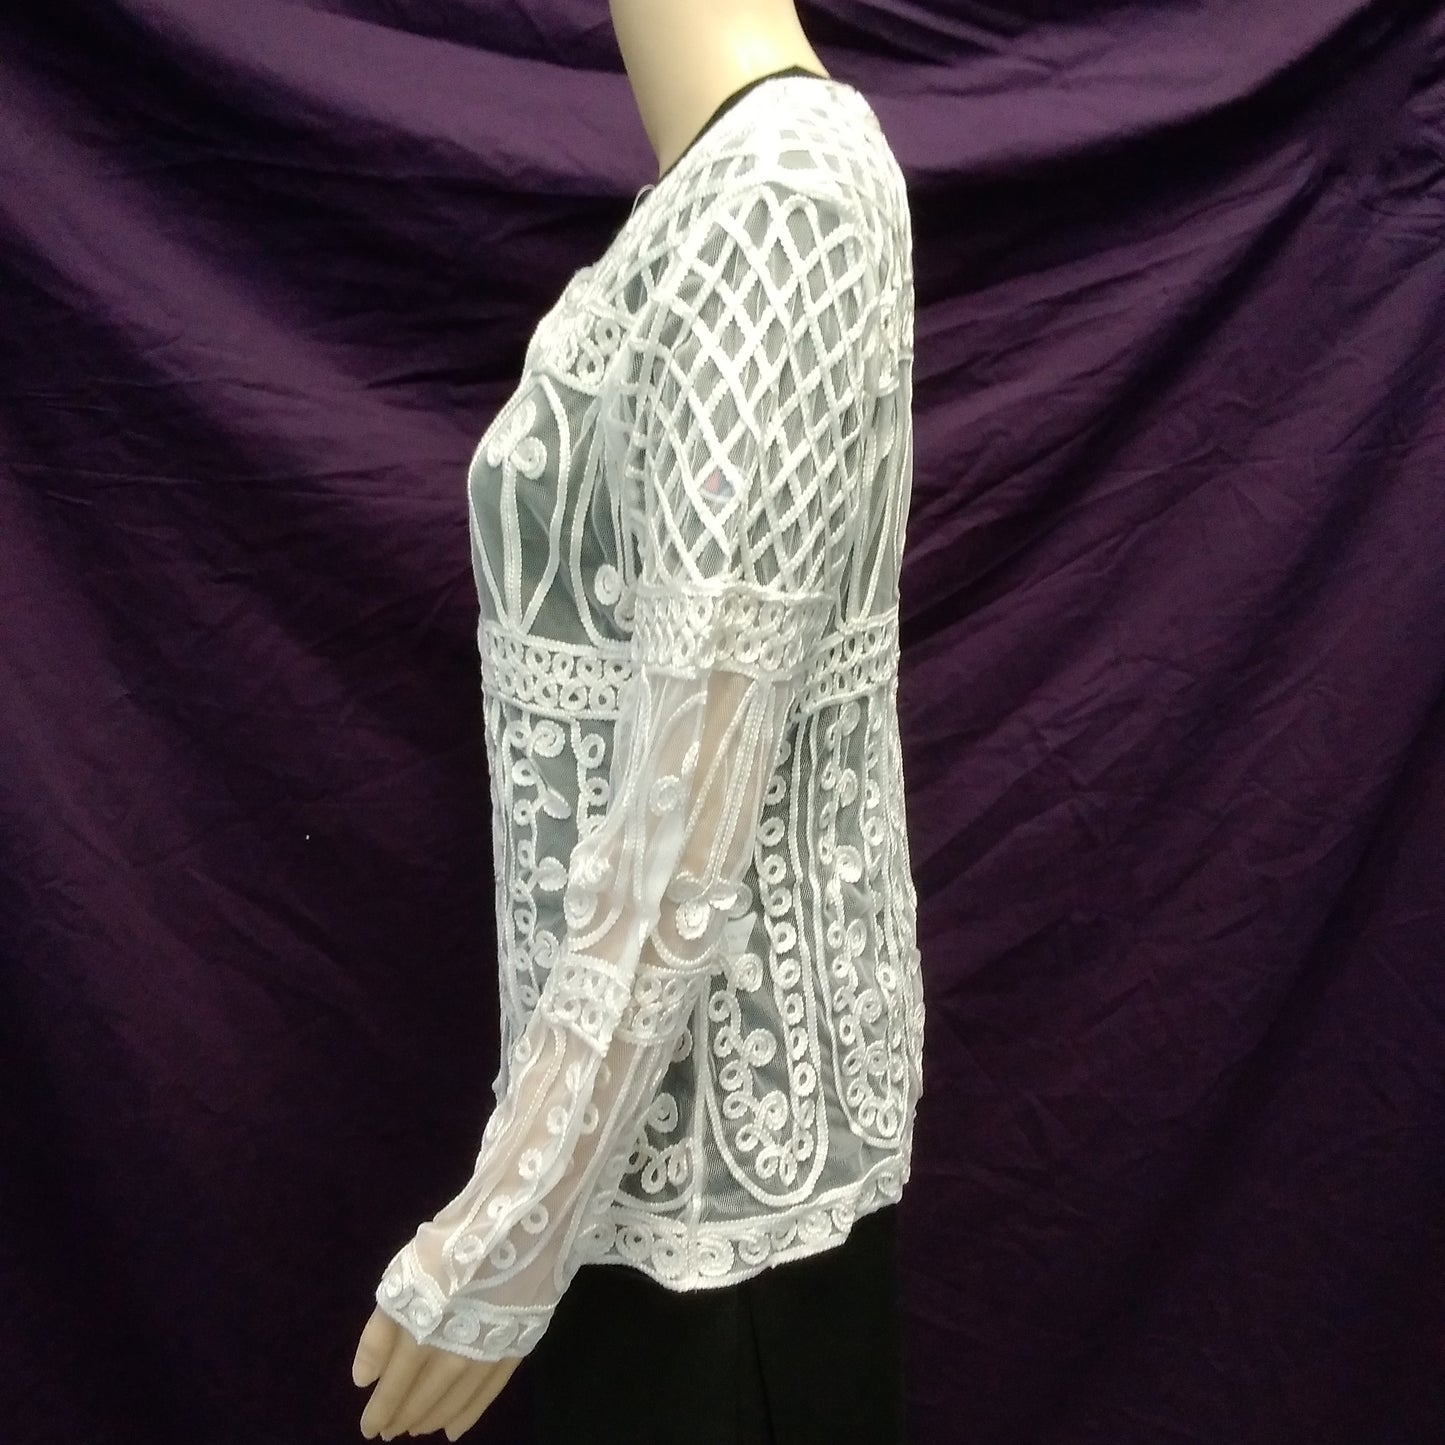 NWT - MAGGIE Mr. Tablecloth White Lace Long Sleeve Blazer Jacket - L